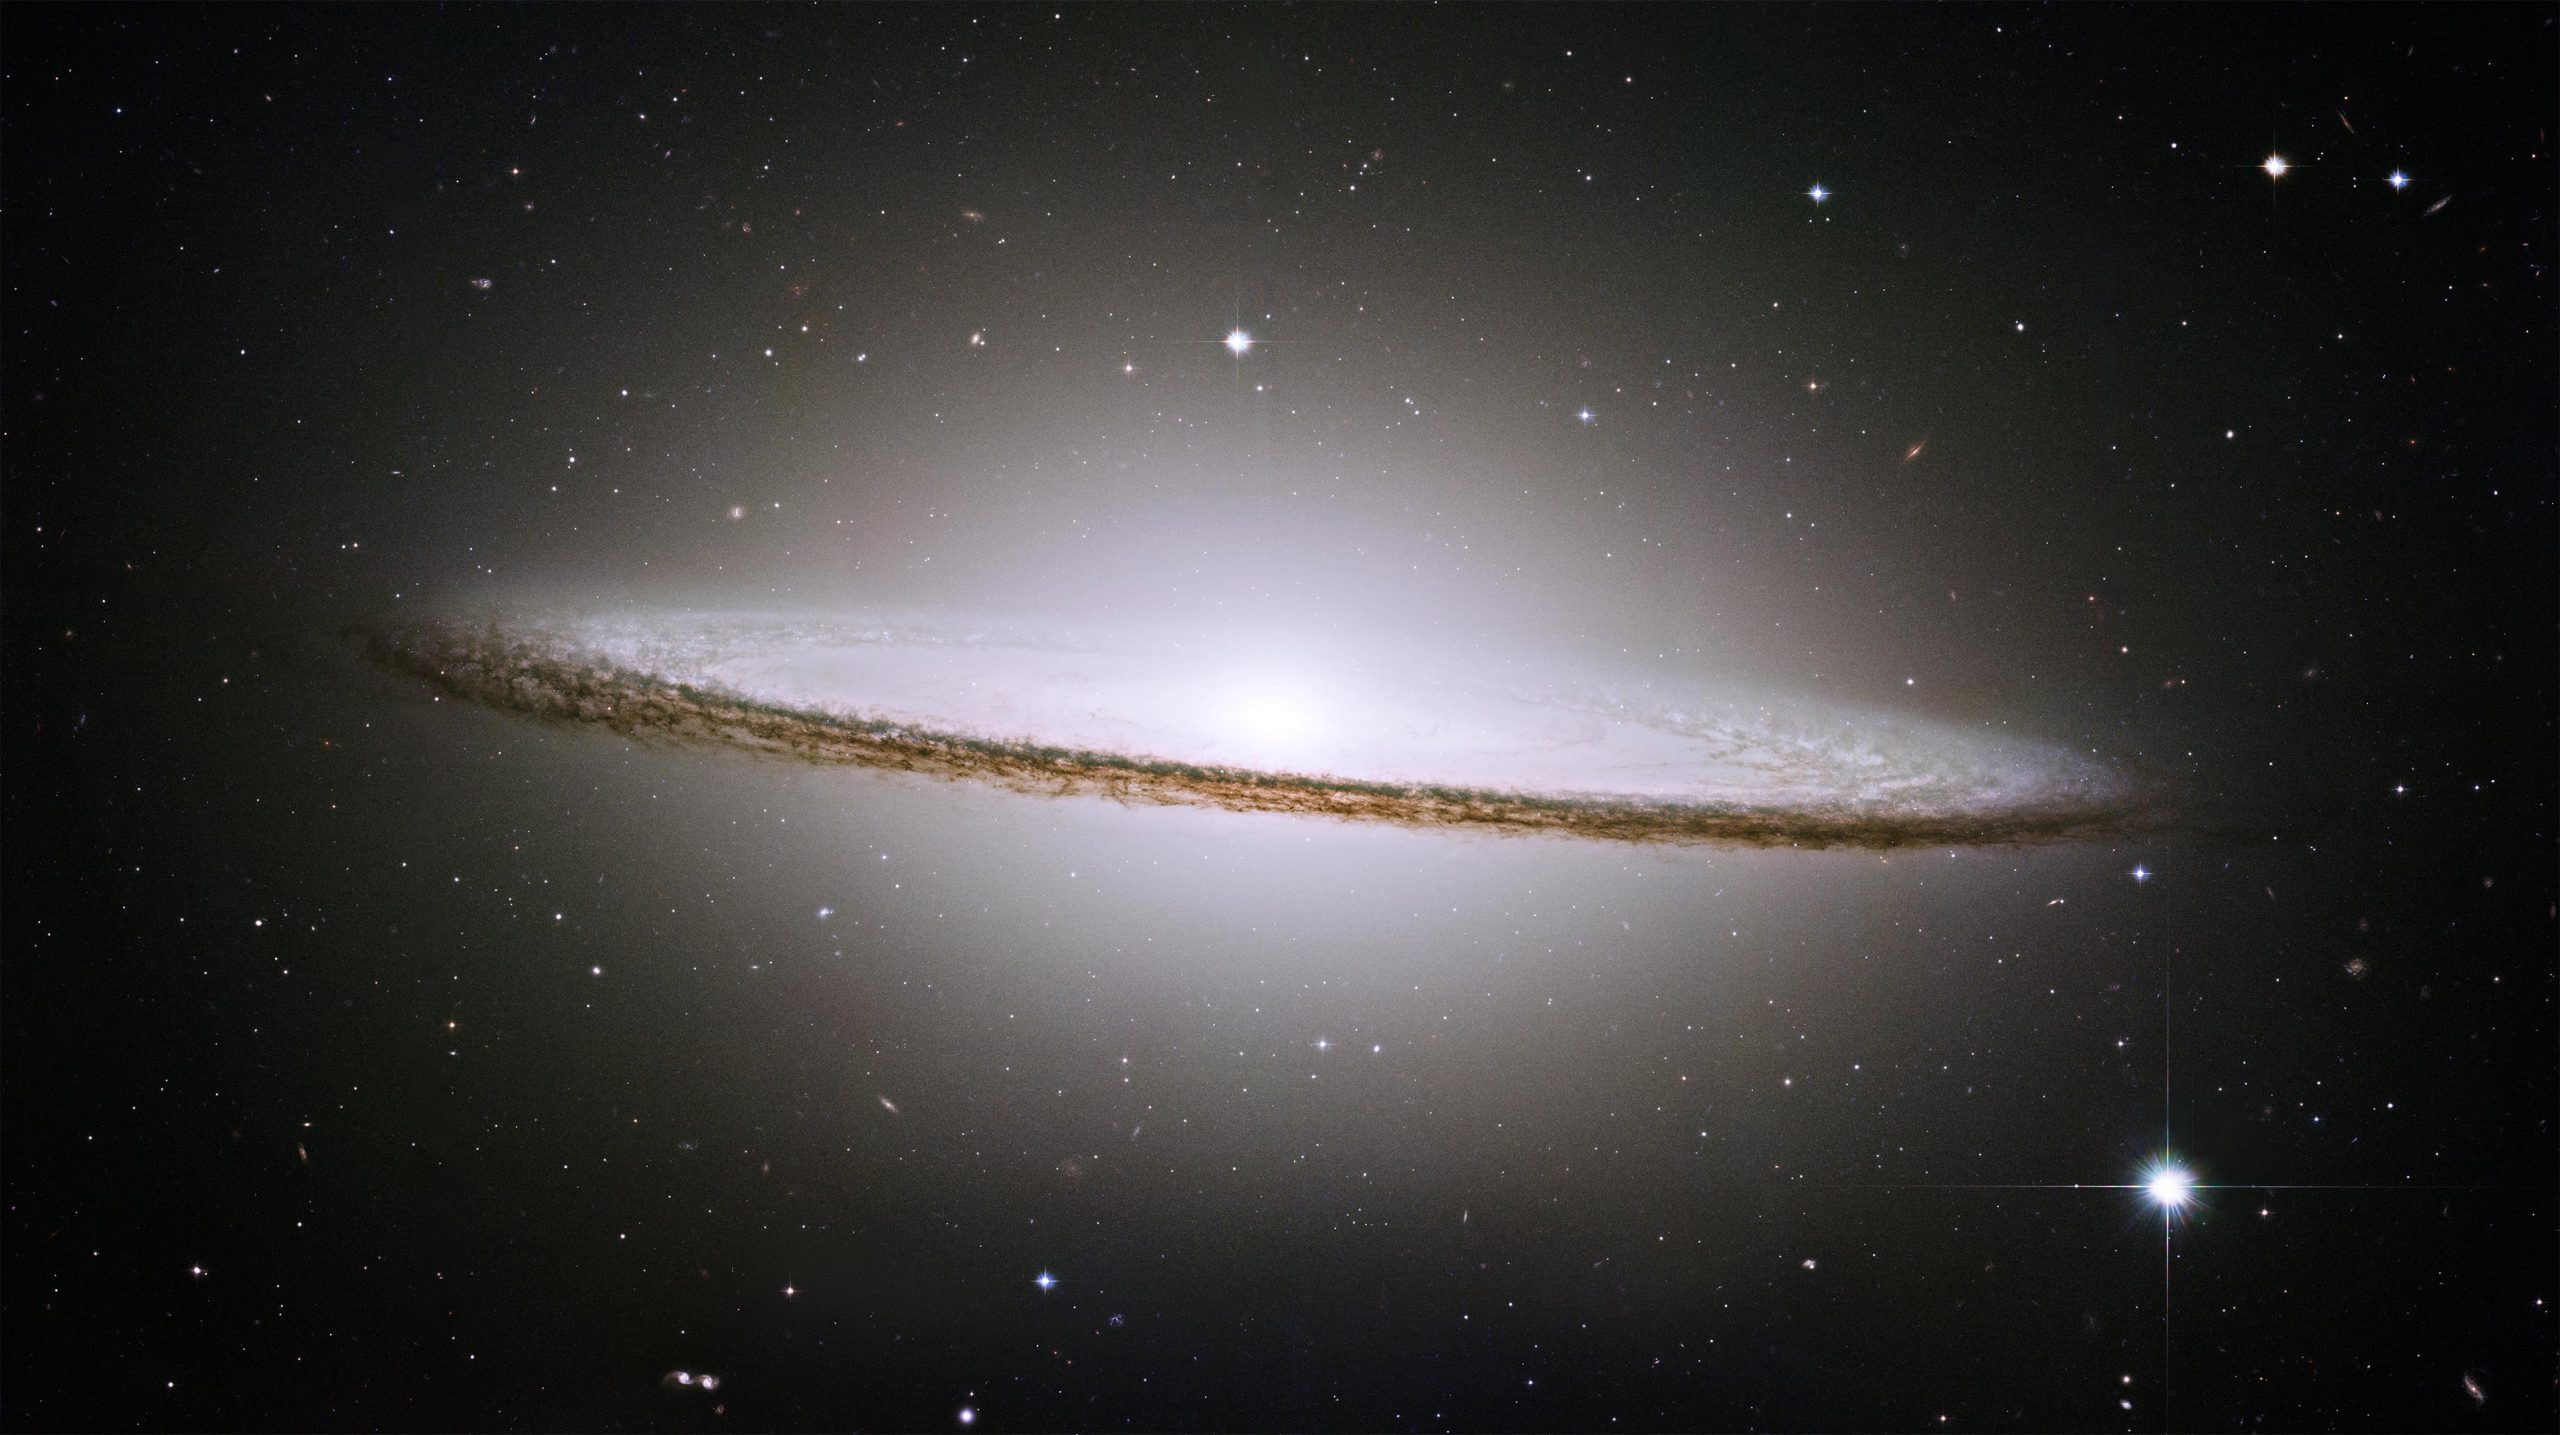 Hubble Spots a “Small” Sombrero – Just 80,000 Light Years Across